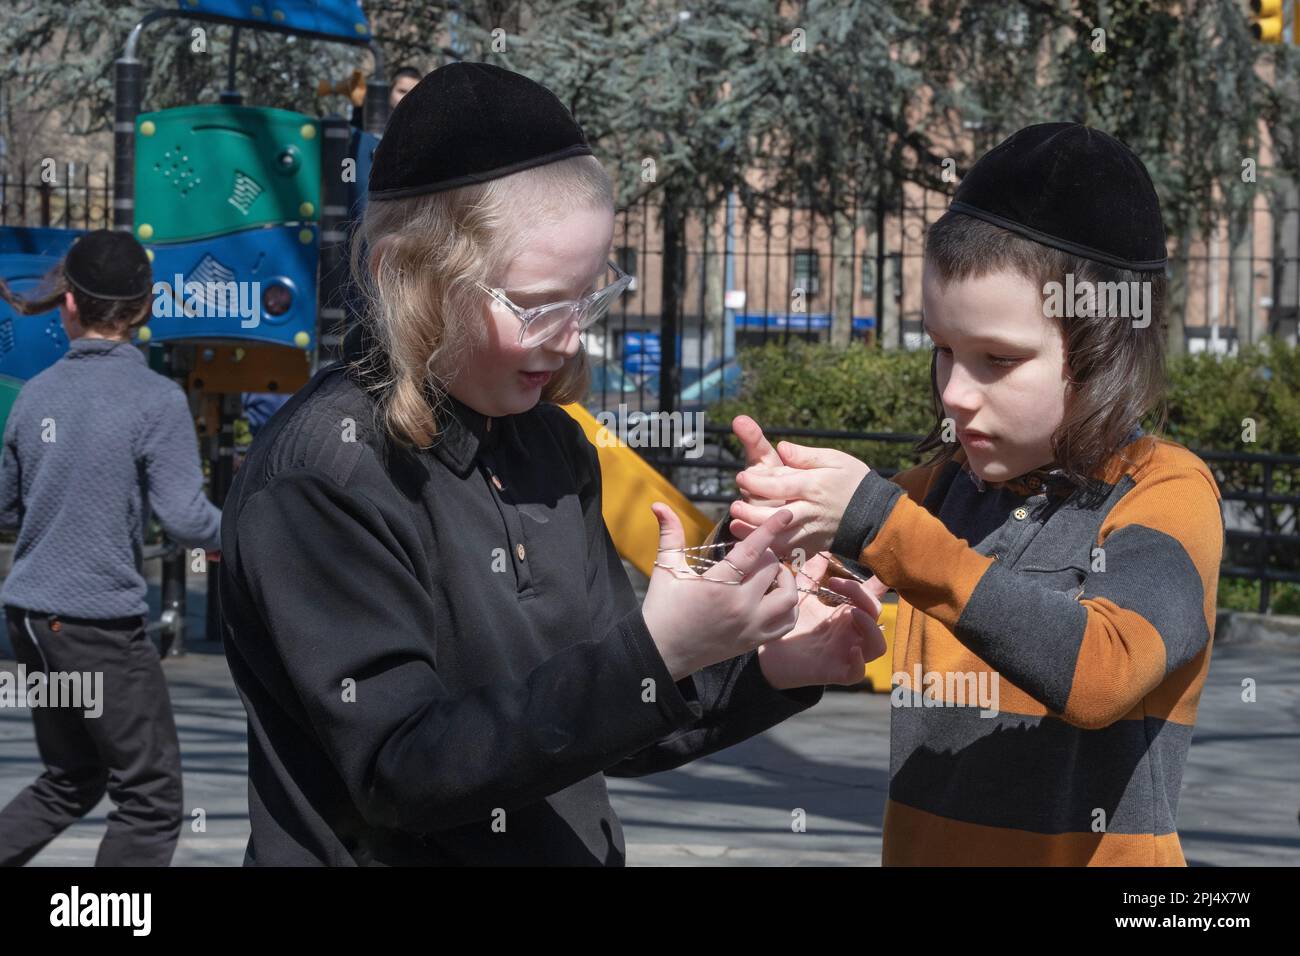 During recess, 2 orthodox Jewish students with long peyes play Cat's Cradle, a game palyed with string. In Brooklyn, New York. Stock Photo